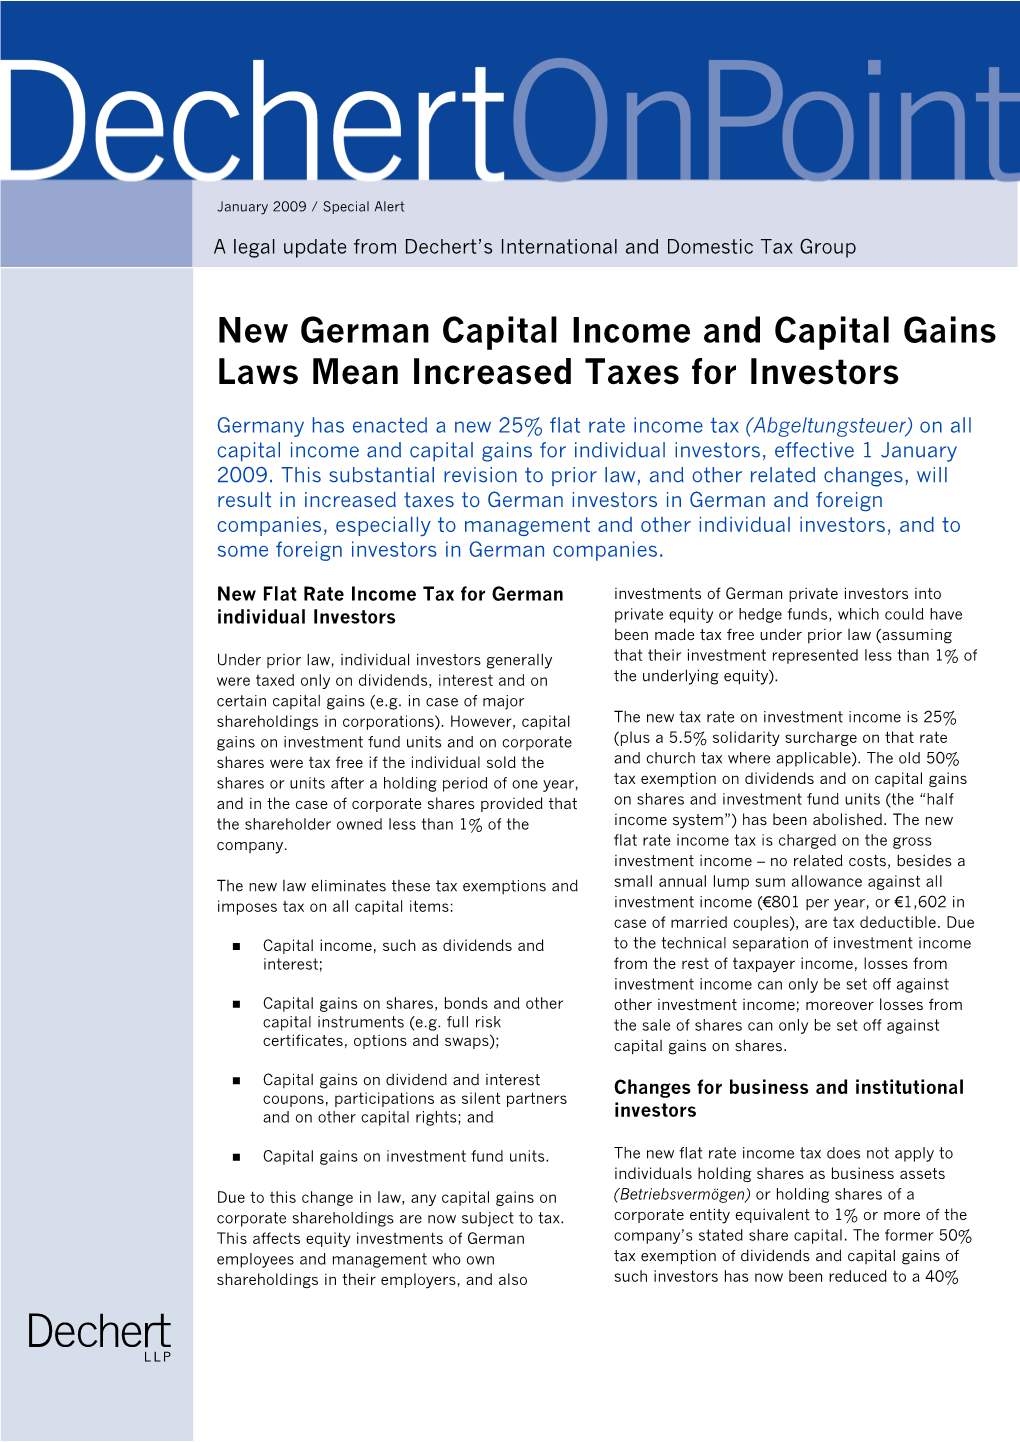 New German Capital Income and Capital Gains Laws Mean Increased Taxes for Investors